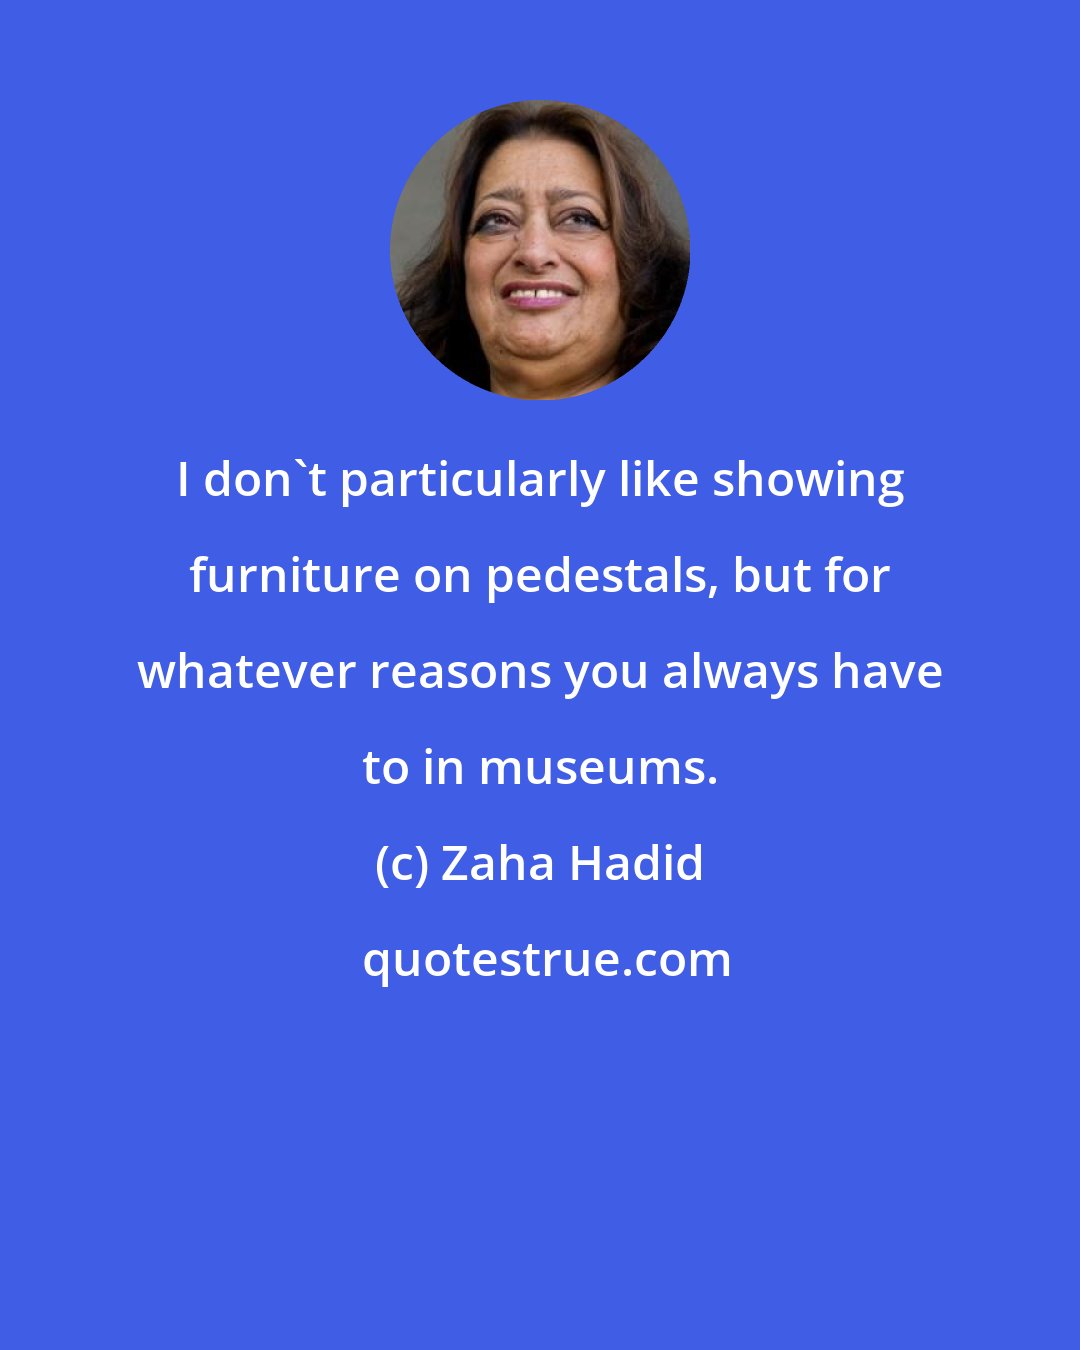 Zaha Hadid: I don't particularly like showing furniture on pedestals, but for whatever reasons you always have to in museums.